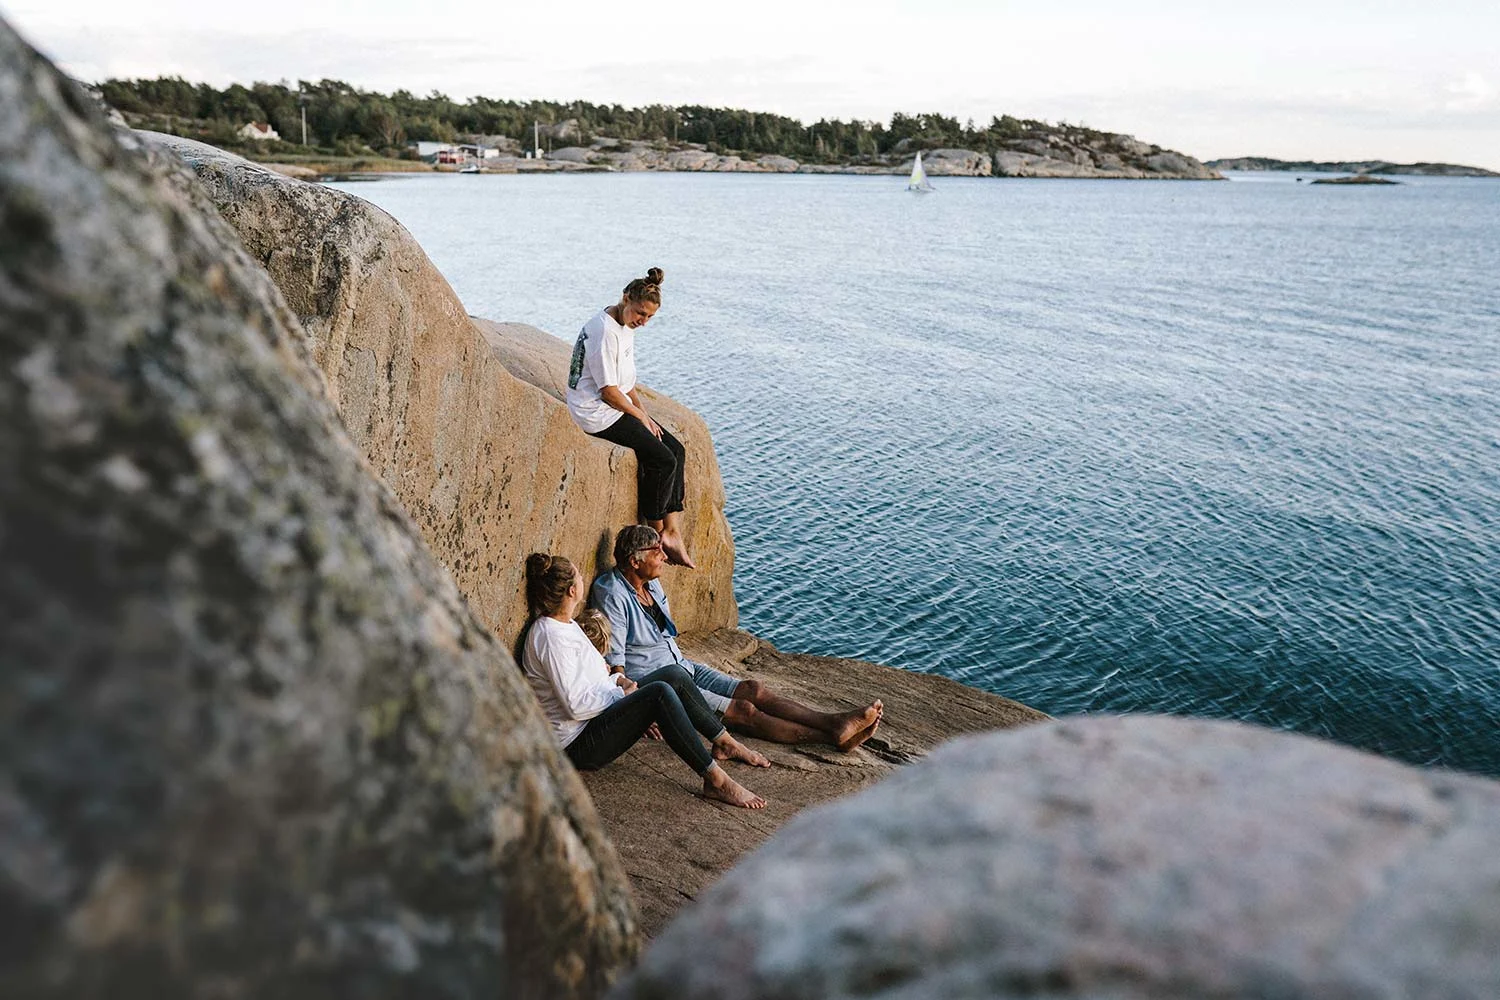 People sitting on a rock by the water.